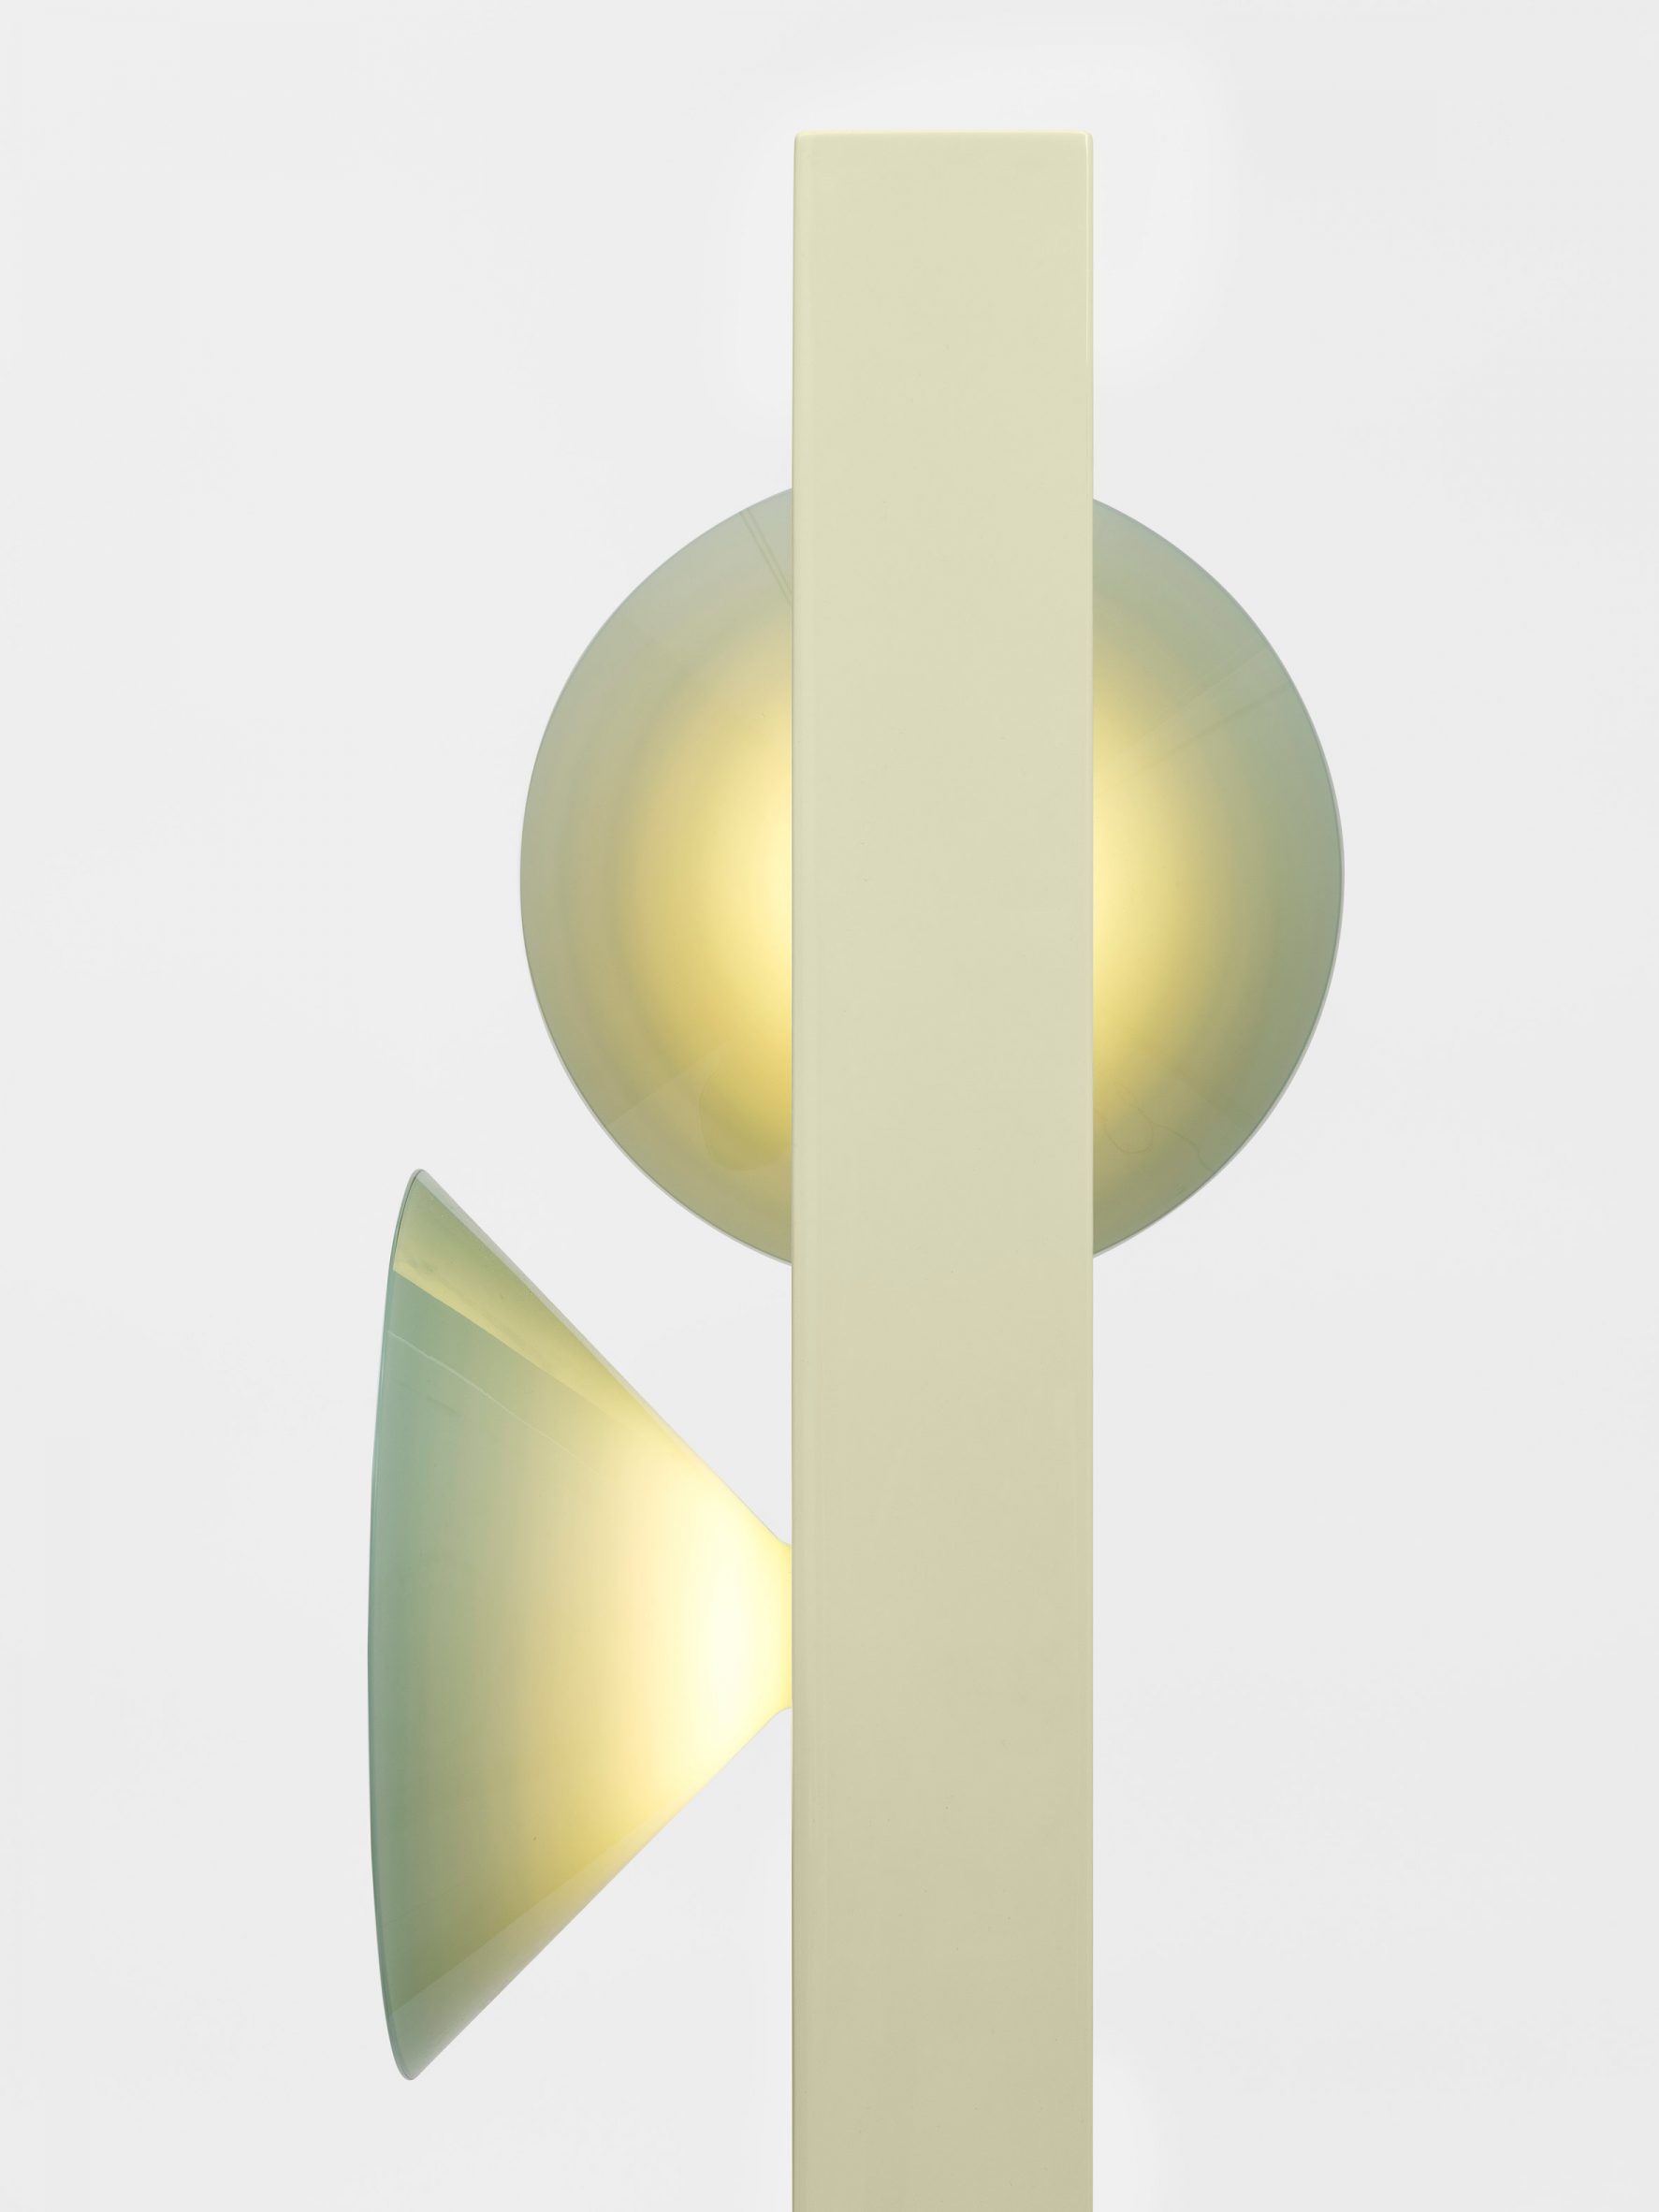 Signals floor lamp in pale shades